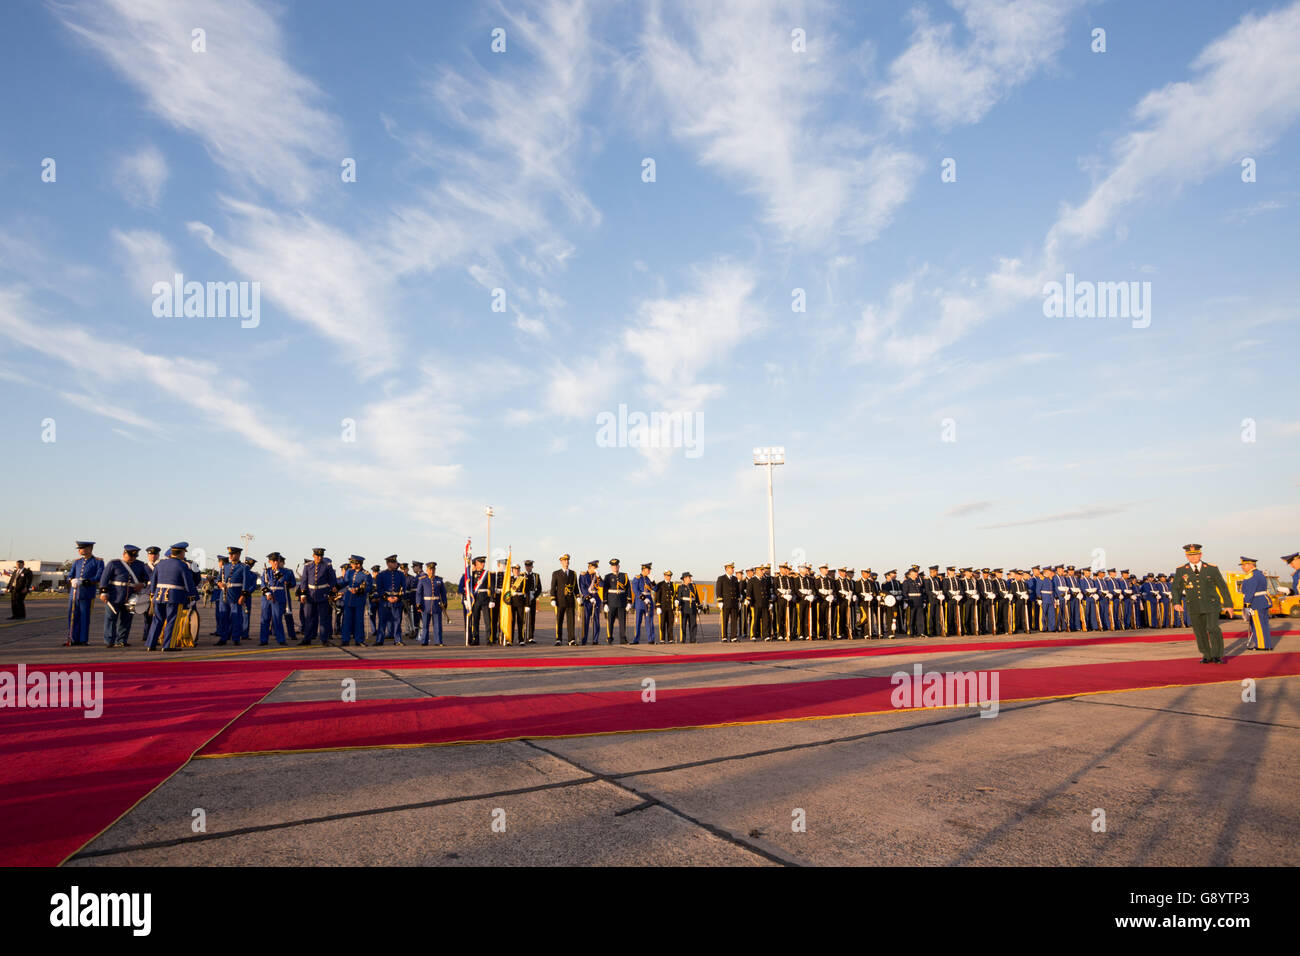 Asuncion, Paraguay. 30th June, 2016. Paraguay's honour guards are seen before the departure ceremony for Taiwan's (Republic of China) President Tsai Ing-wen, Silvio Pettirossi International Airport, Luque, Paraguay. Credit:  Andre M. Chang/ARDUOPRESS/Alamy Live News Stock Photo